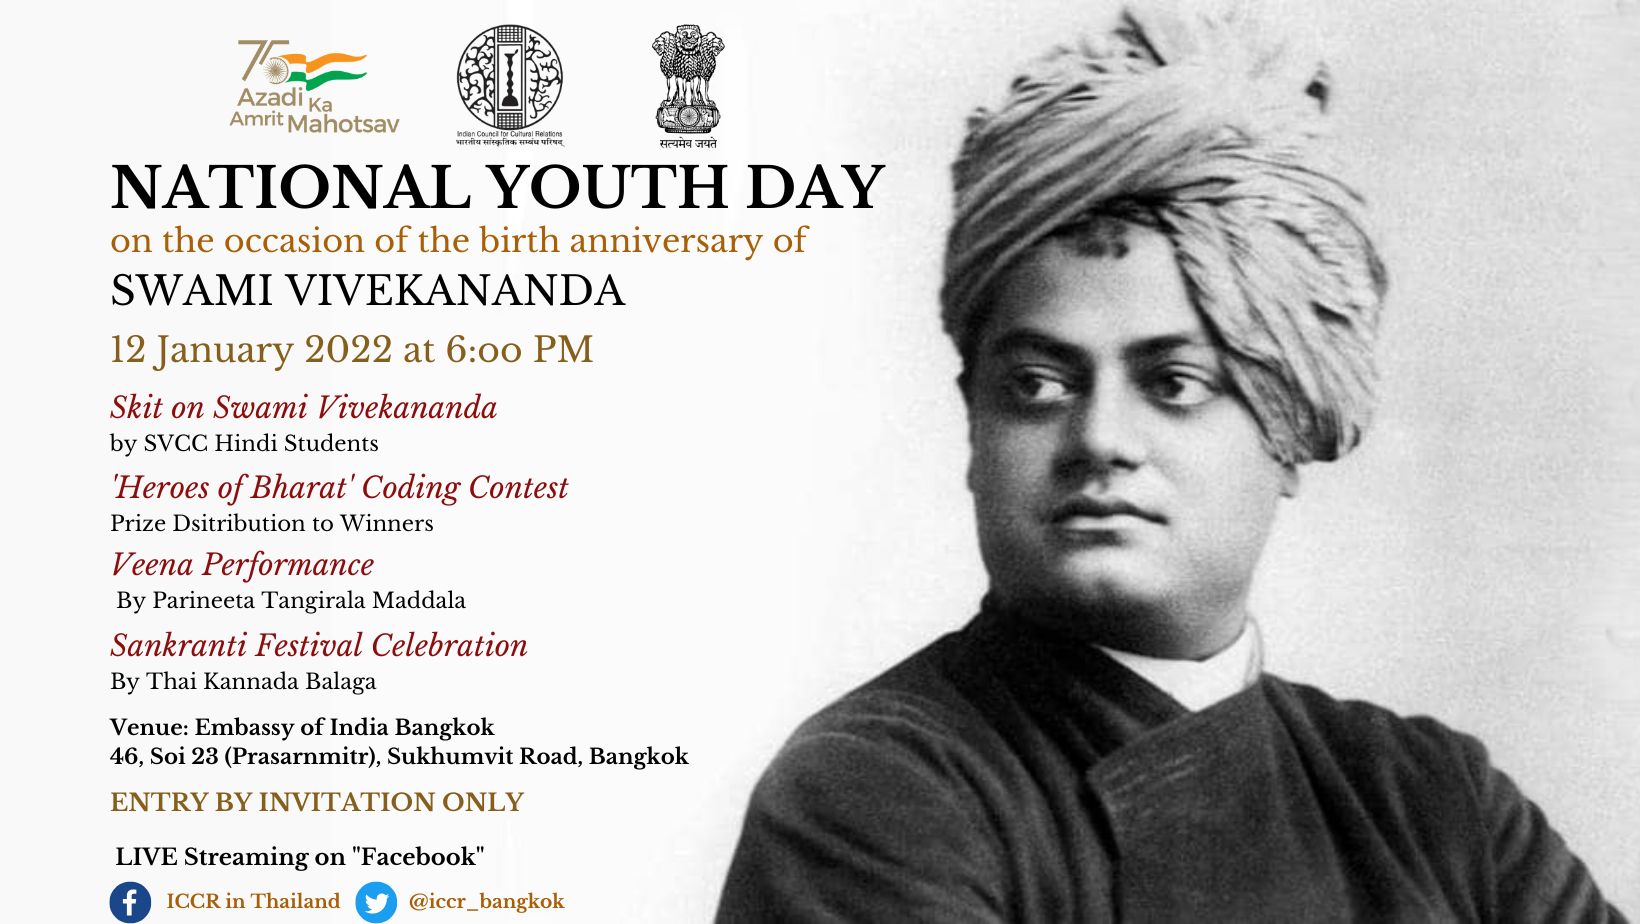 SVCC's event on National Youth Day to ICCR ​​​​​​​ Presenting National Youth Day celebrations on the Birth Anniversary of Swami Vivekananda.